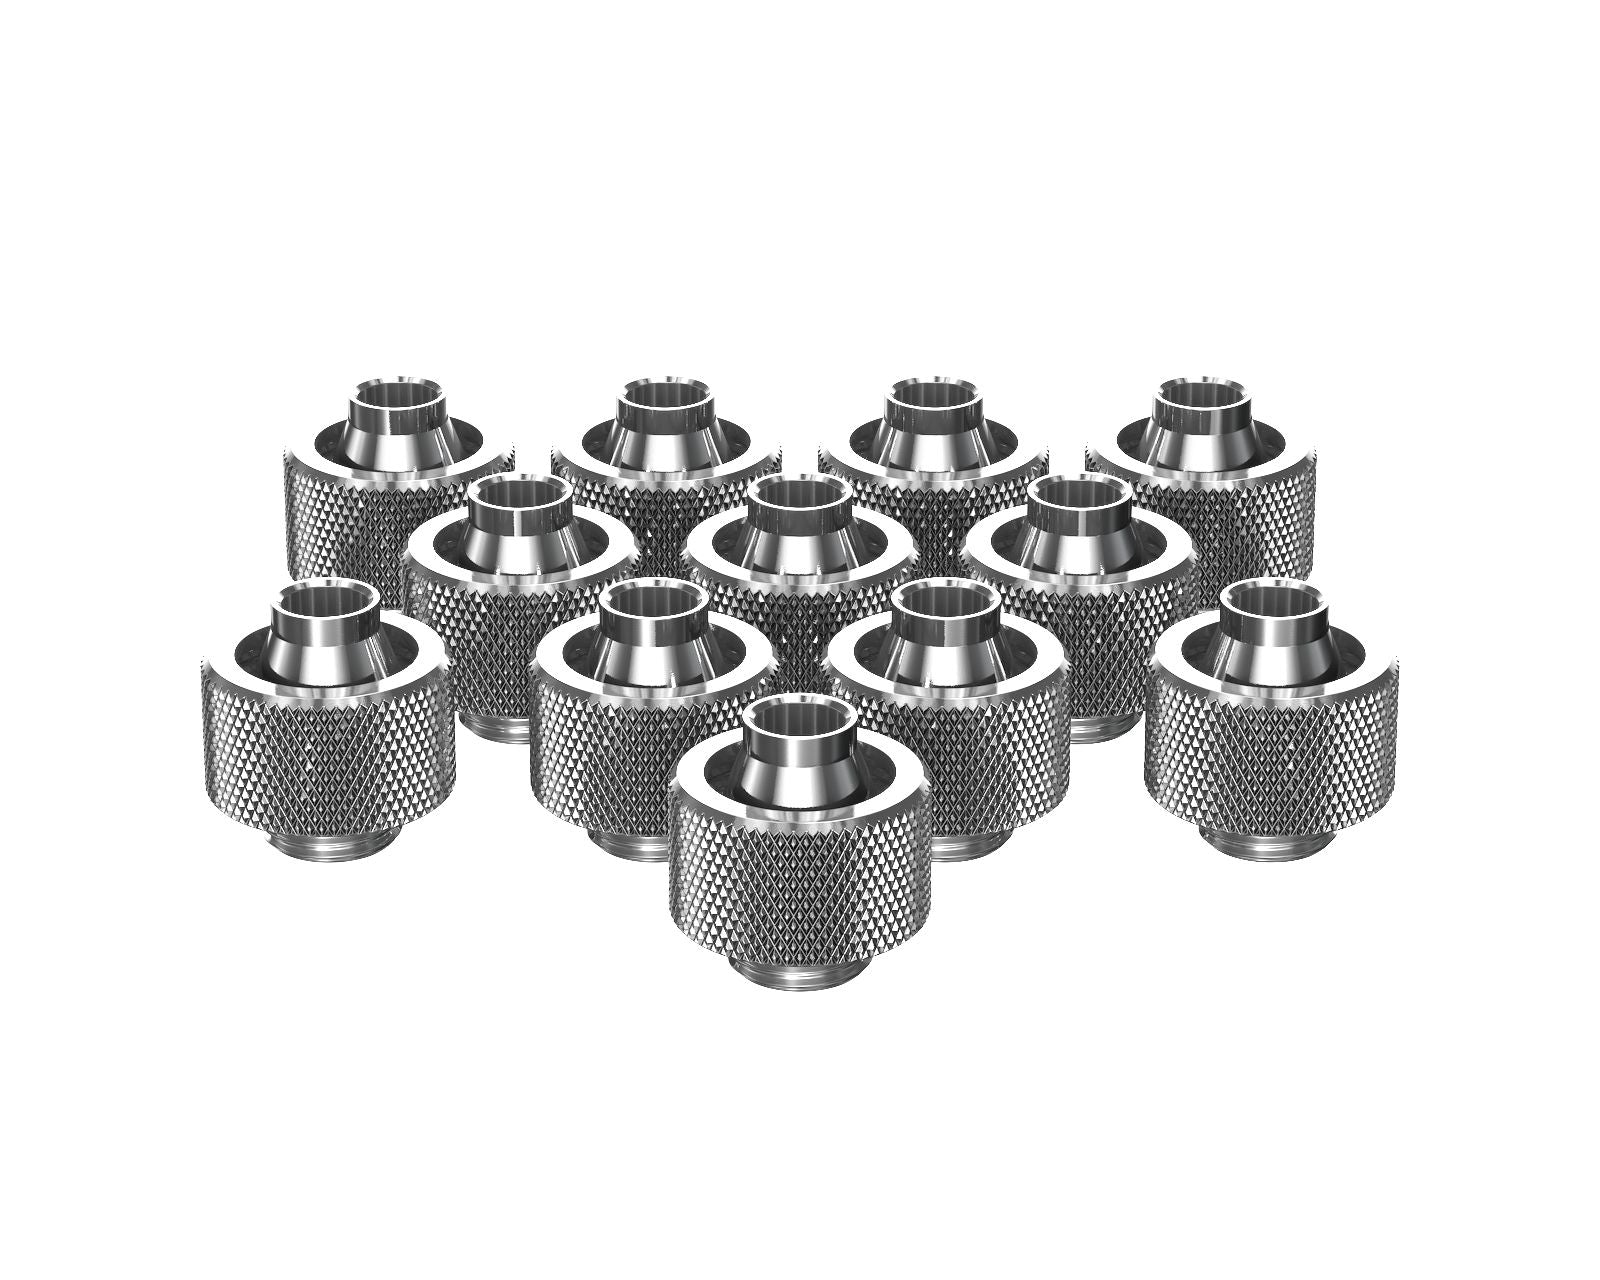 PrimoChill SecureFit SX - Premium Compression Fitting For 7/16in ID x 5/8in OD Flexible Tubing 12 Pack (F-SFSX758-12) - Available in 20+ Colors, Custom Watercooling Loop Ready - Silver Nickel